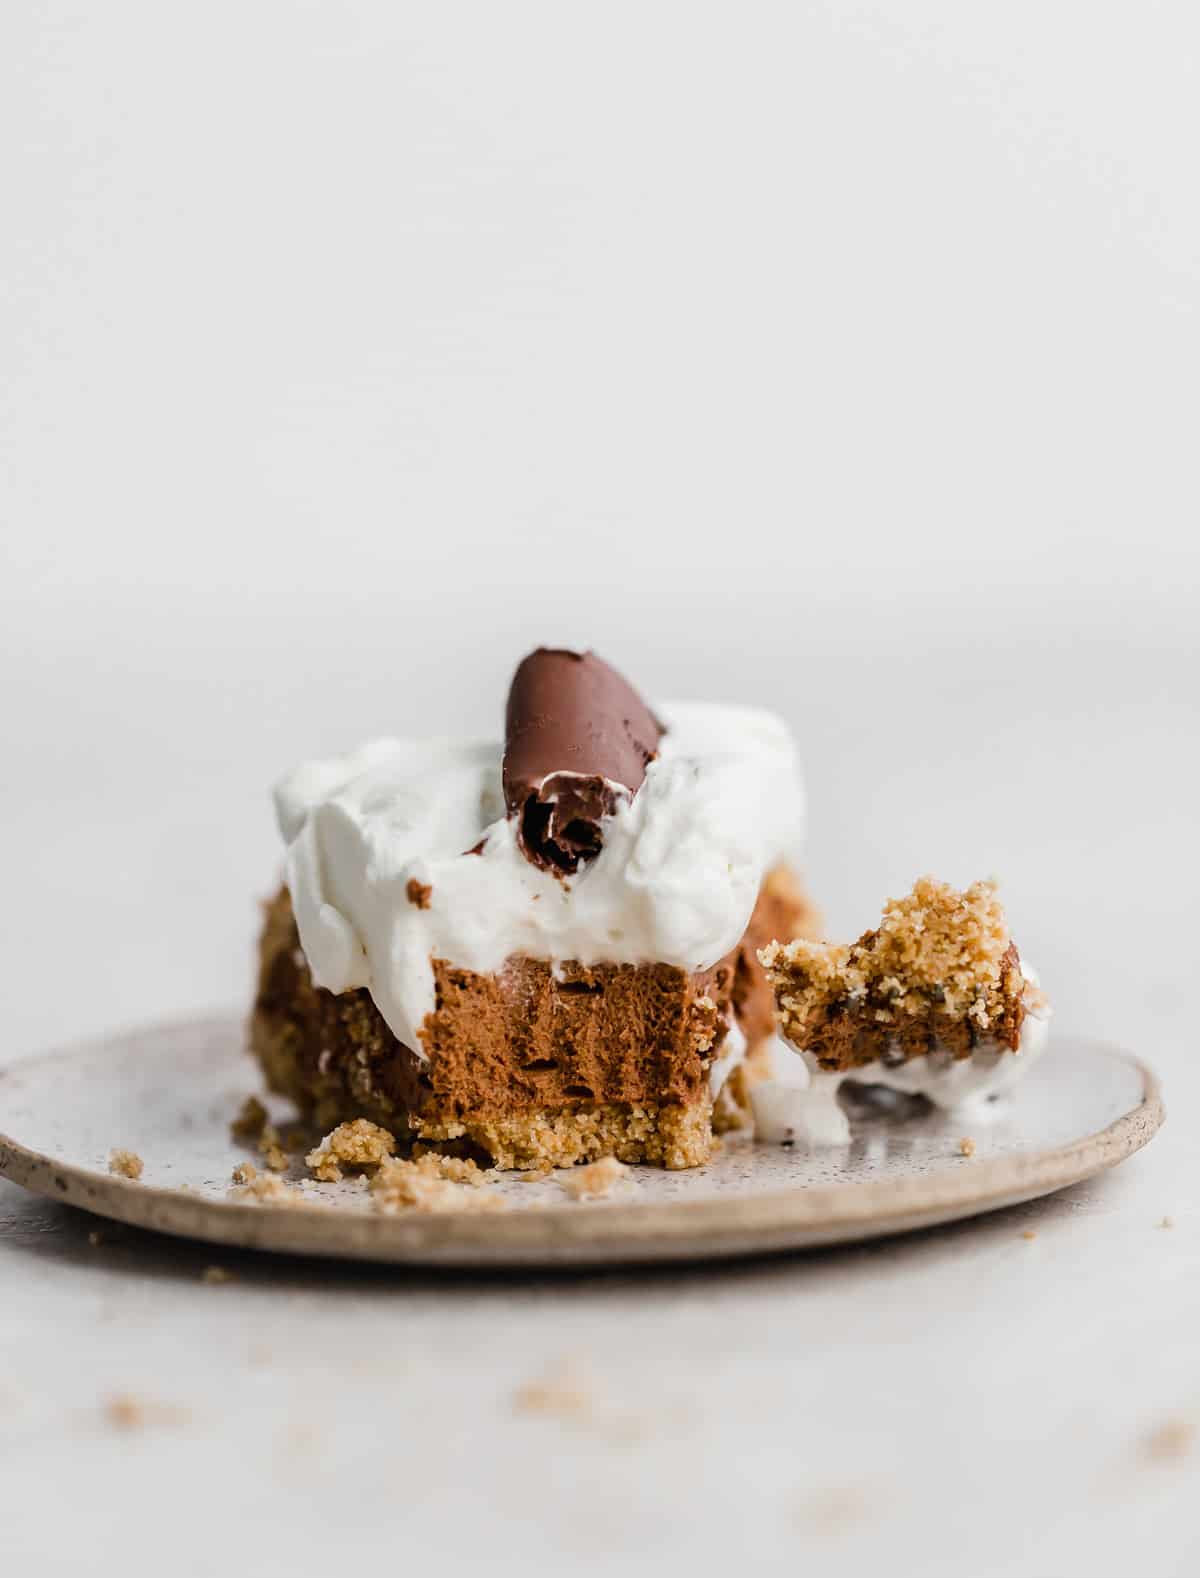 A slice of French Silk Pie on a plate against a white background.